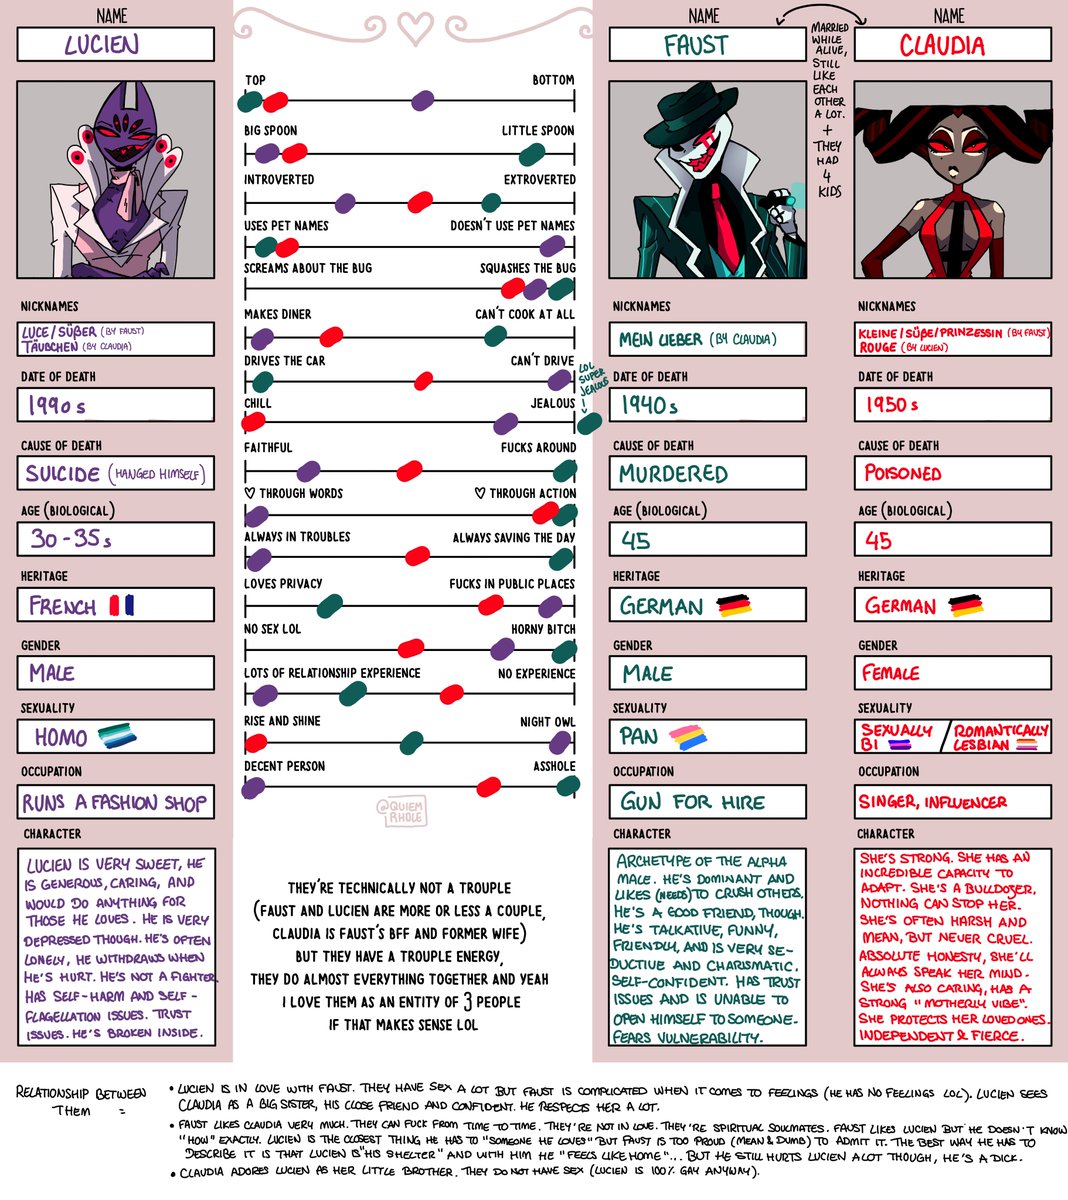 I don't have anything else to share rn, so have some more stuff about Lucien, Faust and Claudia, cause I love them❤ (I ADORE this kind of charts lmao help) #HazbinHotelOC #HazbinHotel